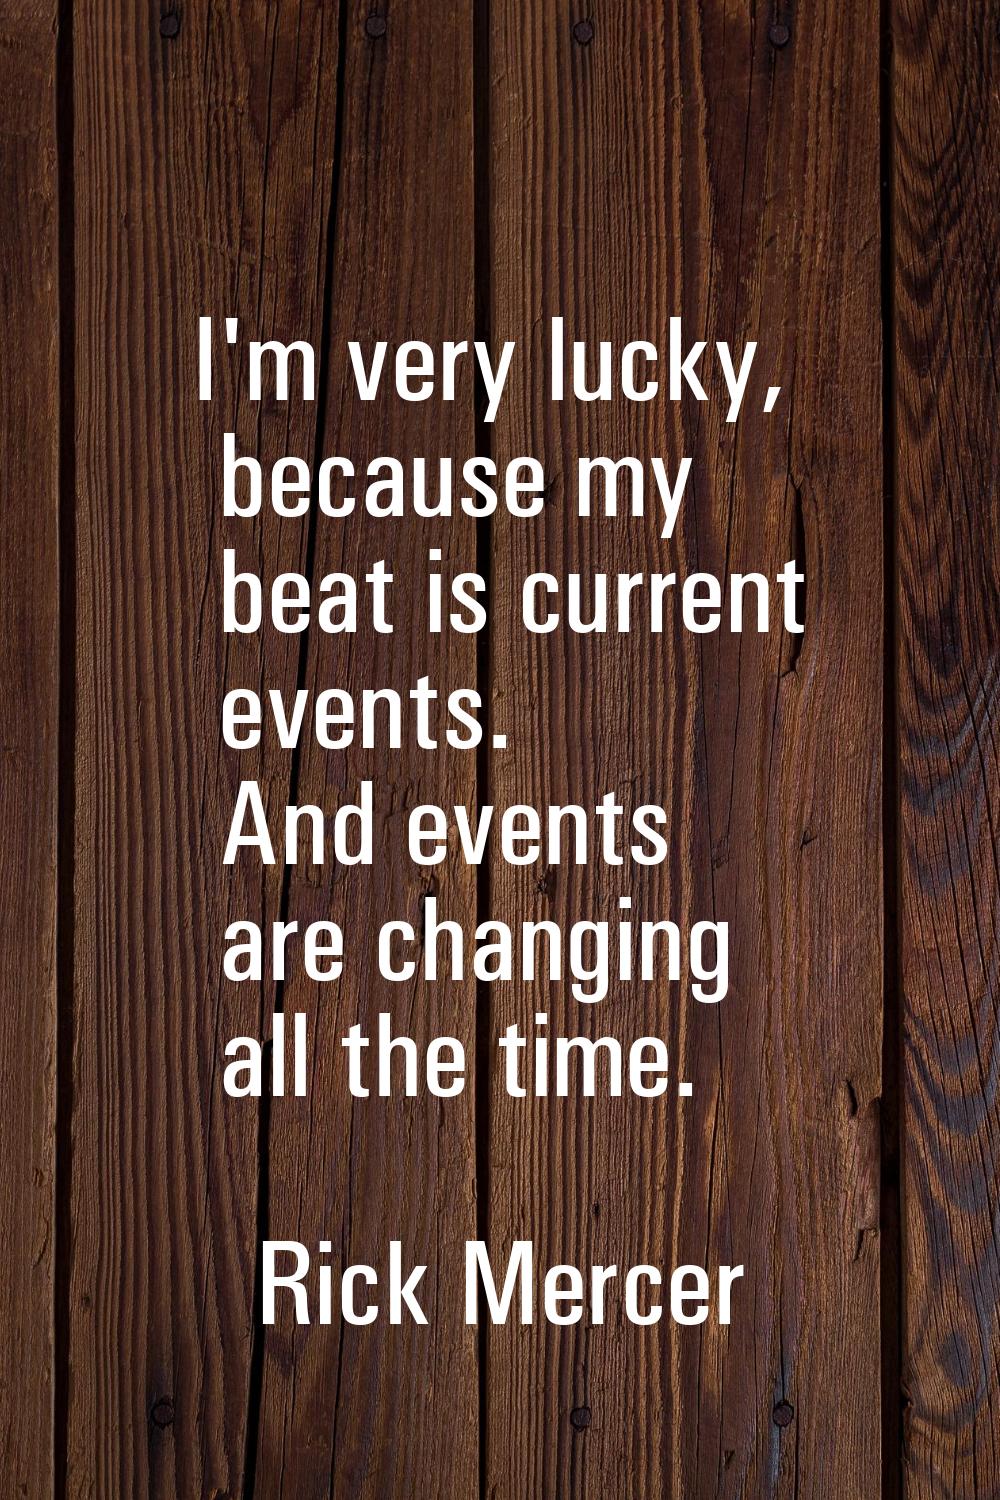 I'm very lucky, because my beat is current events. And events are changing all the time.